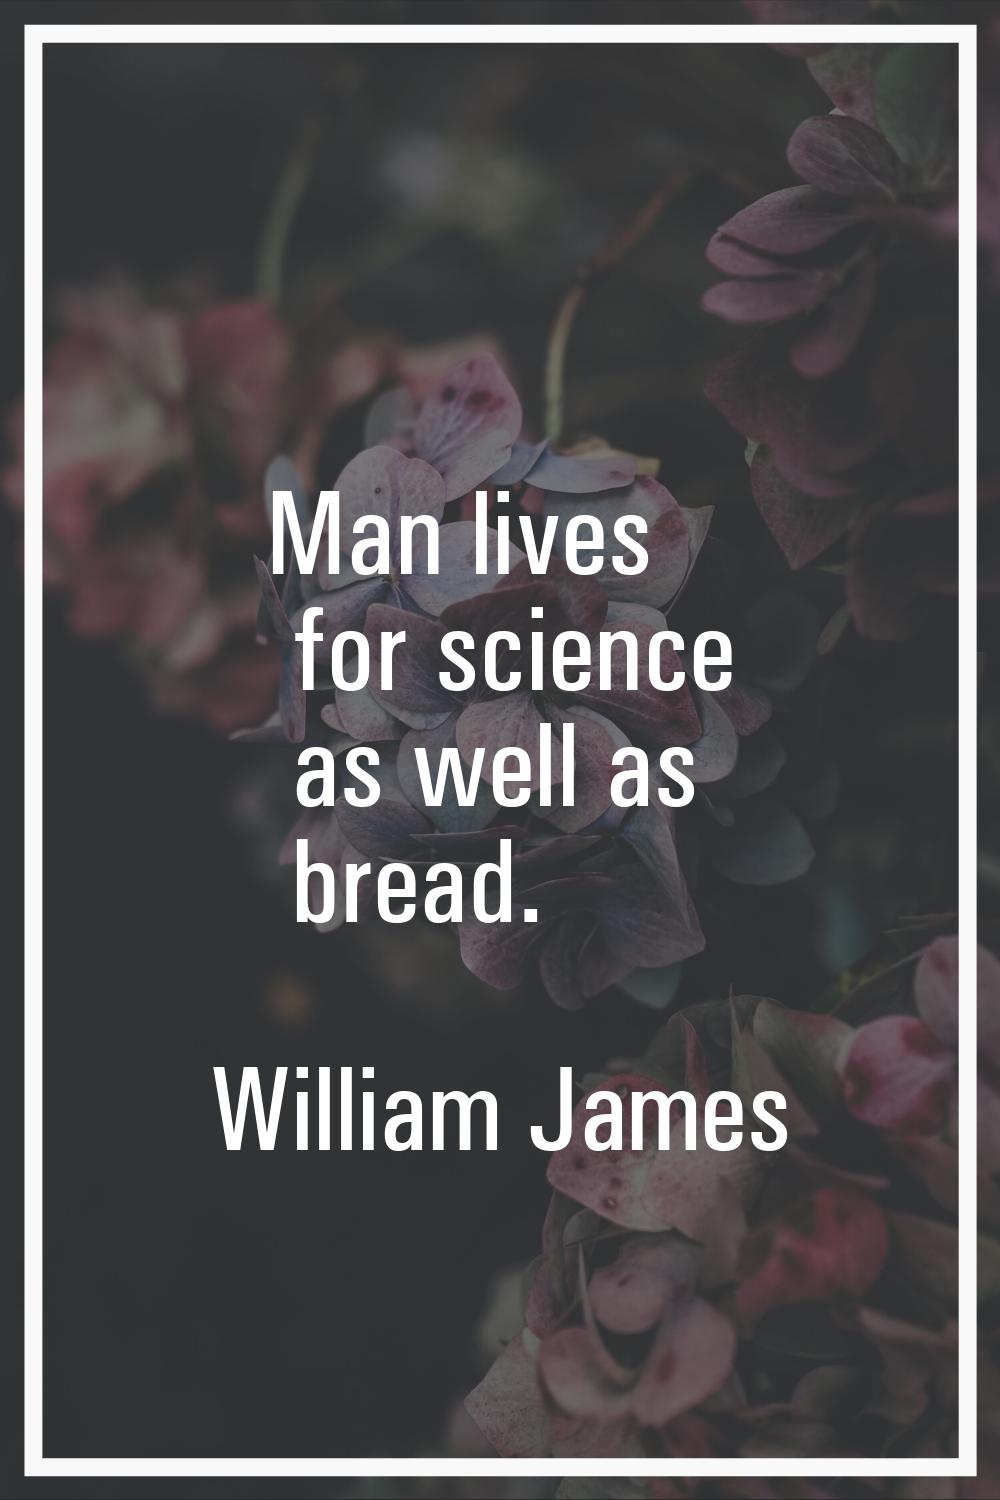 Man lives for science as well as bread.